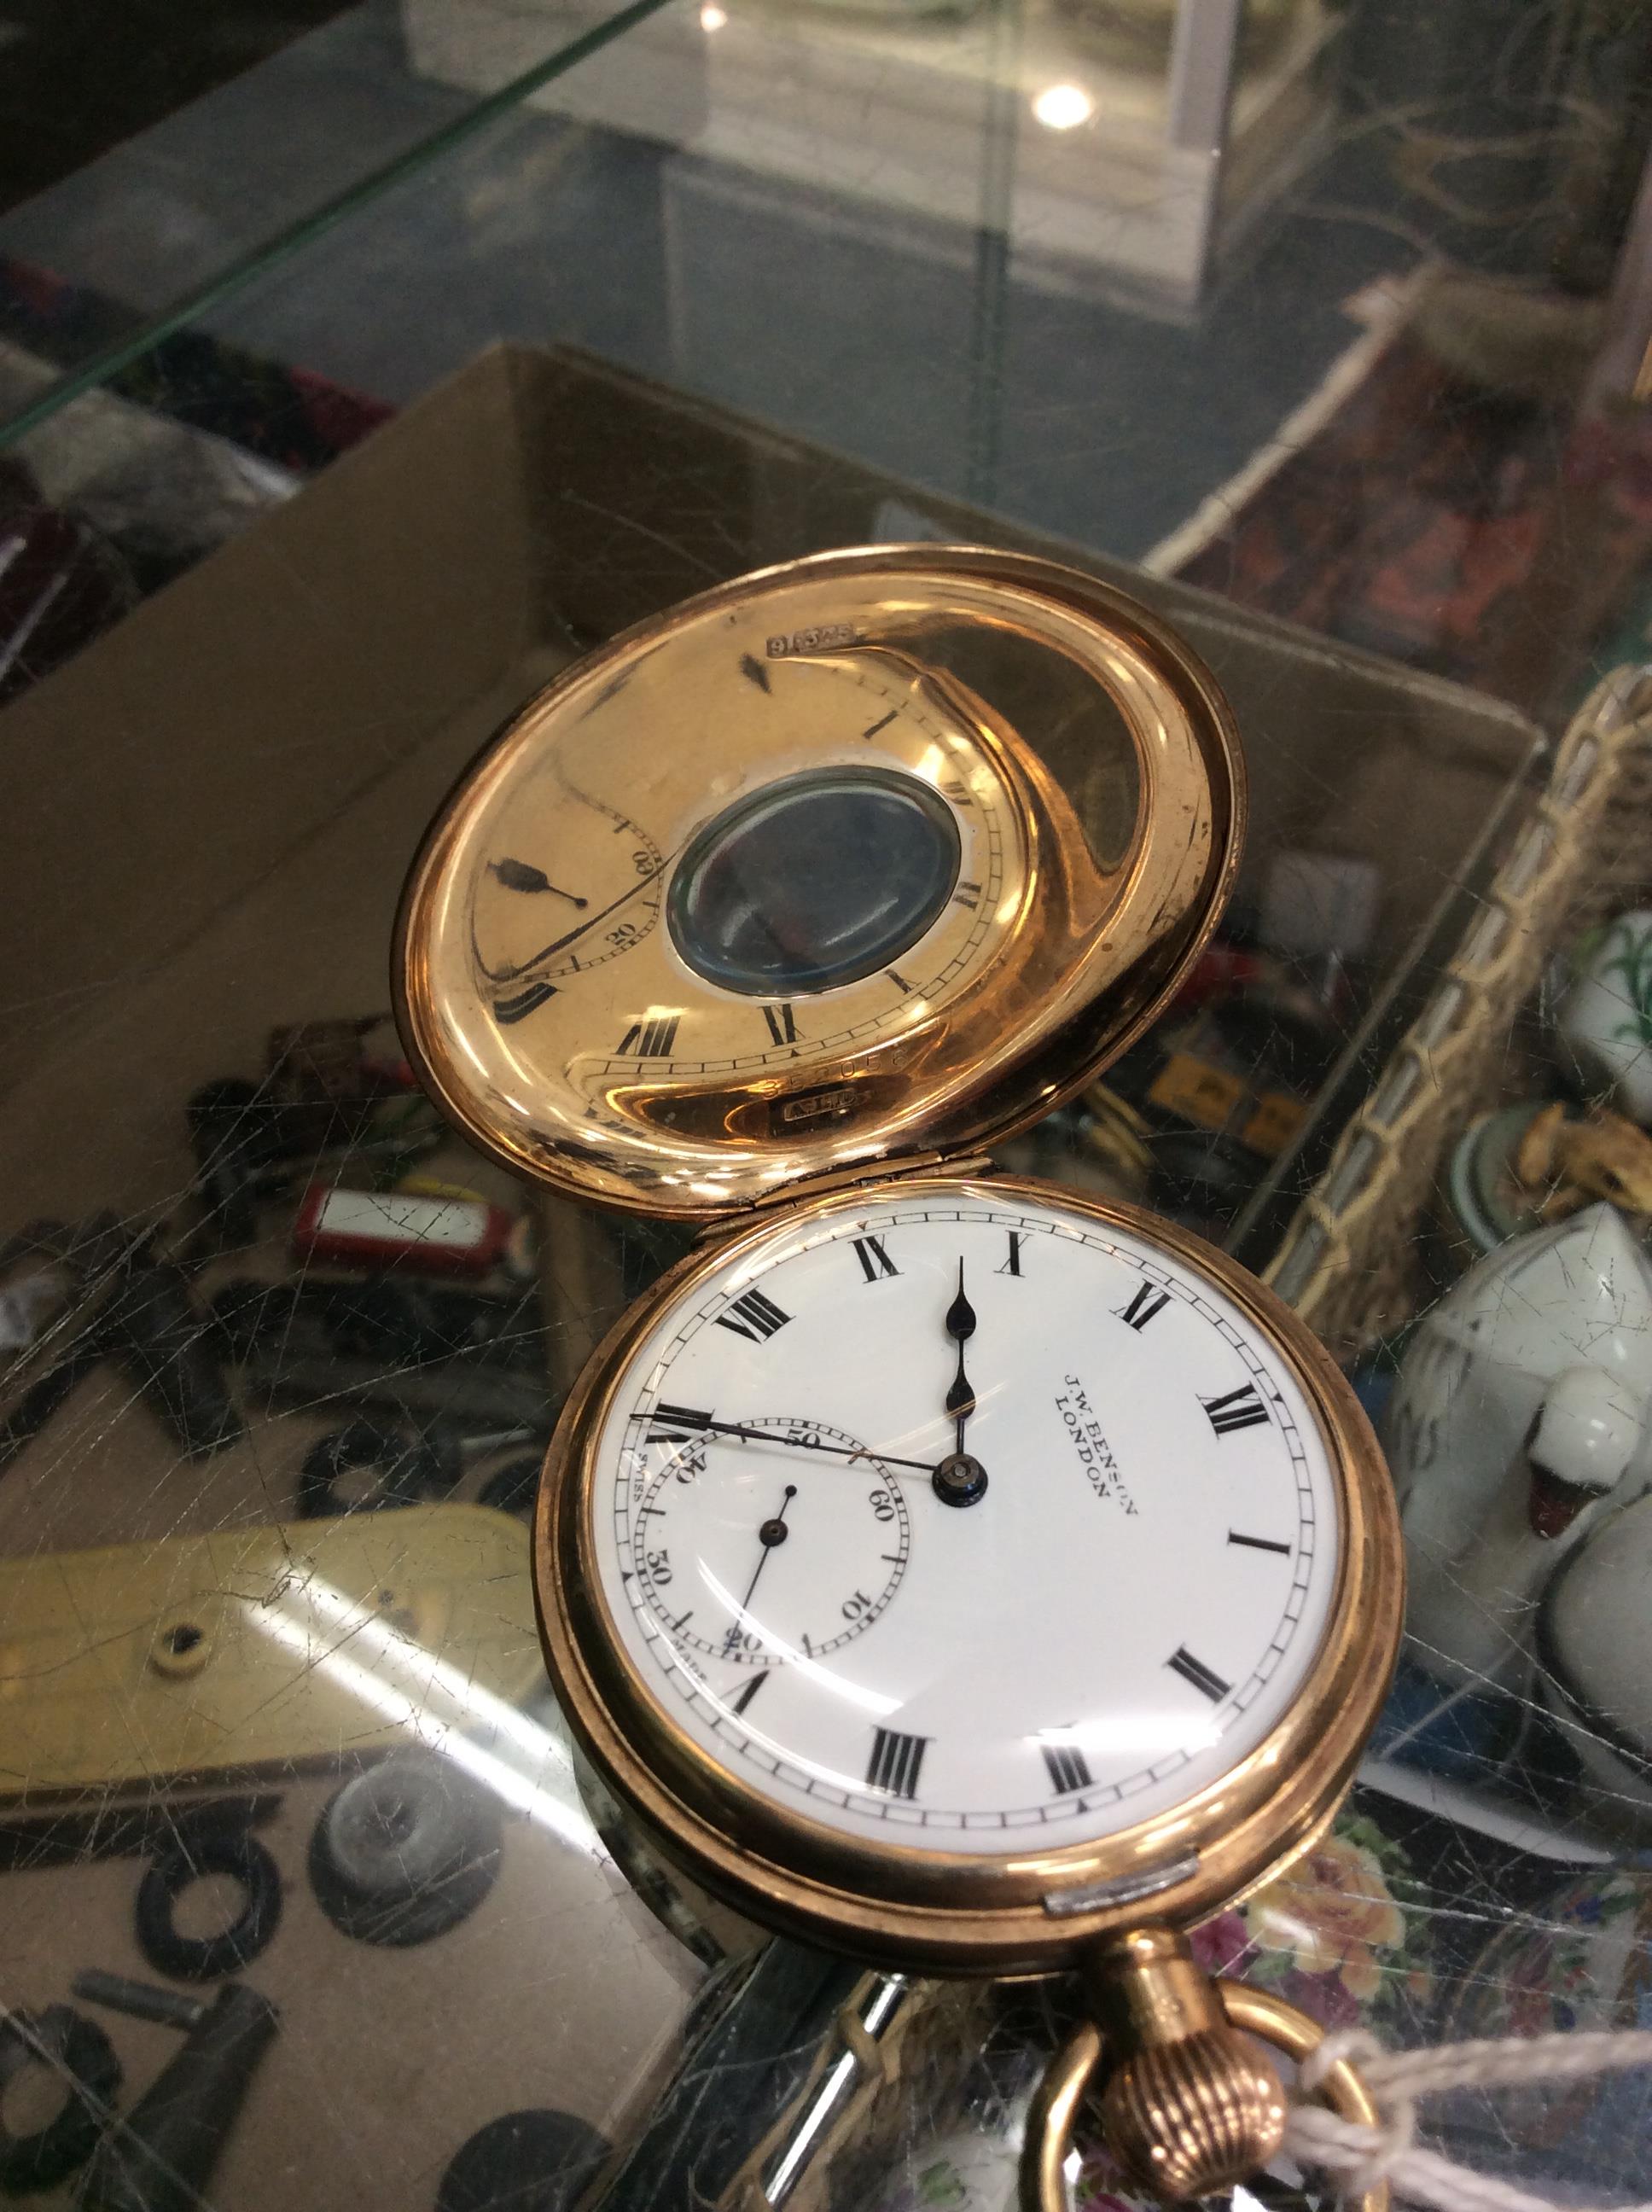 A 9 CARAT YELLOW GOLD BENSON HALF HUNTER POCKET WATCH with white enamel dial and subsidiary dial - Image 2 of 7